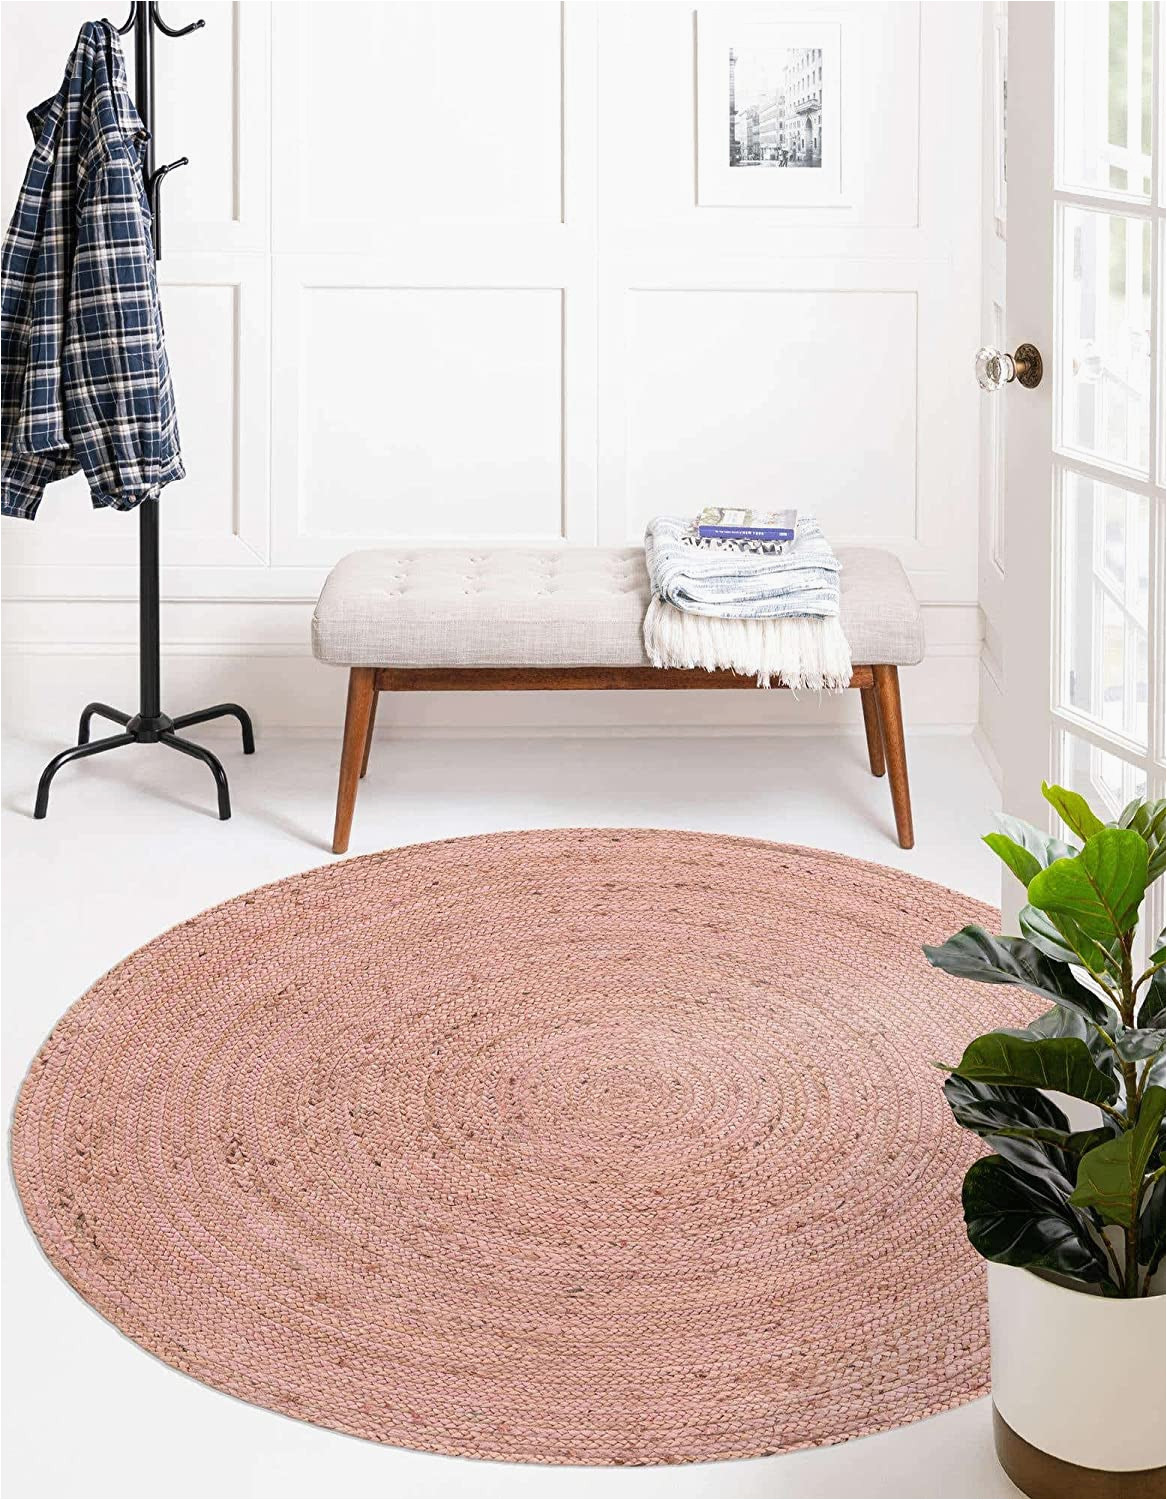 36 Inch Round area Rug Avgari Creation Pink Dye Natural Jute Hand Made Round Living Room, Dining Room, Kitchen Farm House area Rug Carpet Doormat 3″ Feet (36 Inch)